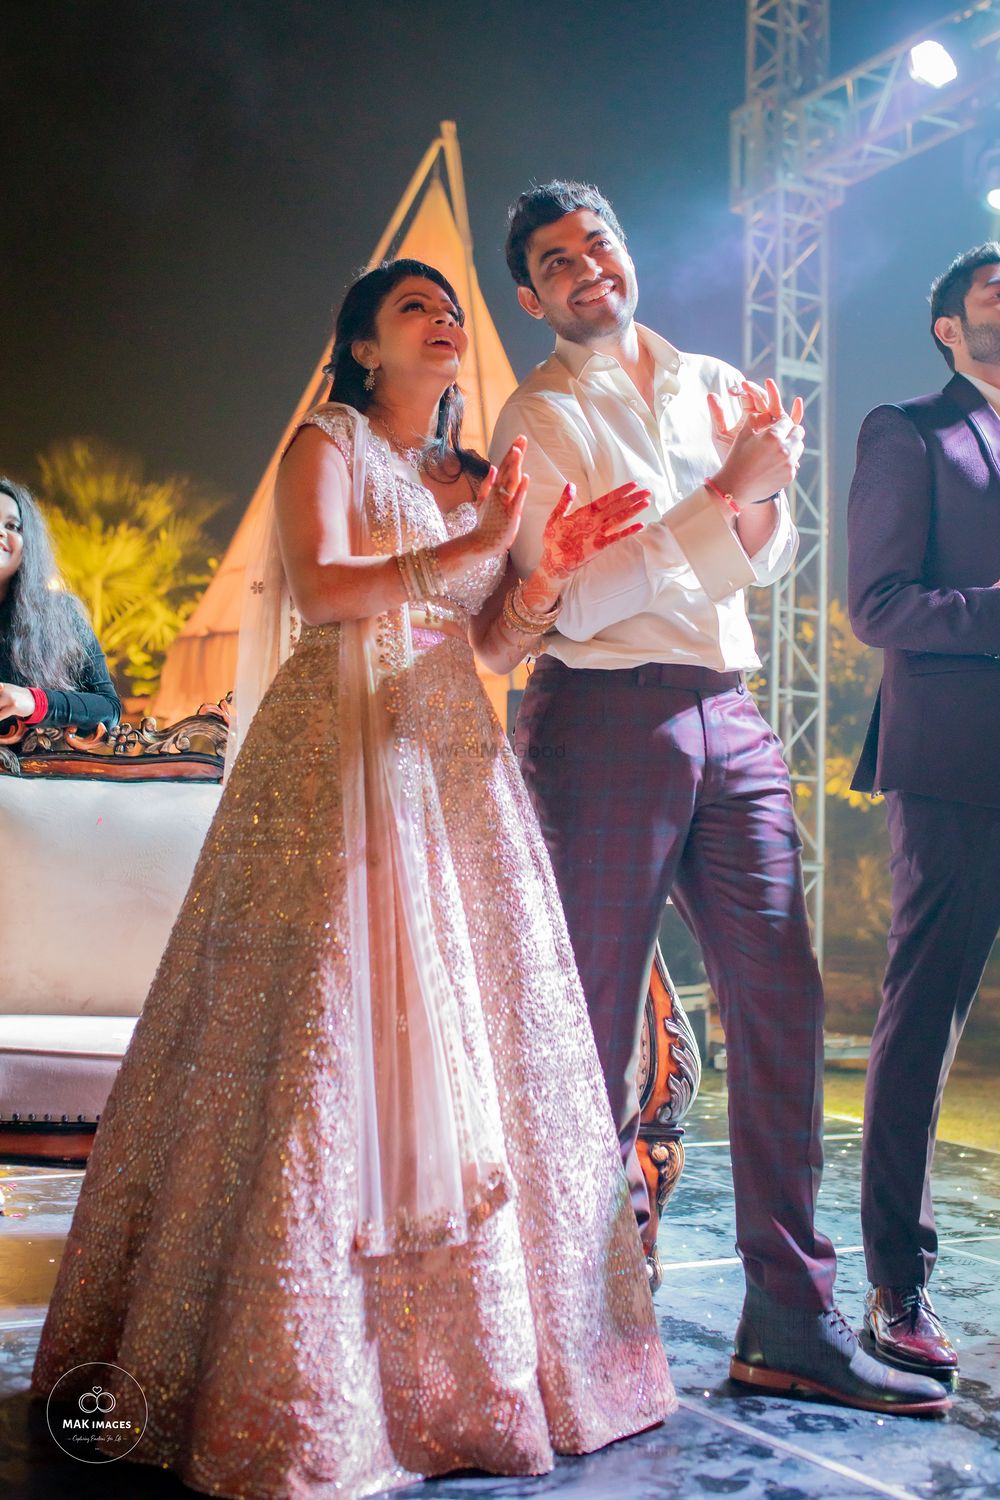 Photo From Neha + Anubhav Engagement - By Mak Images (Artistic Wedding Photography)